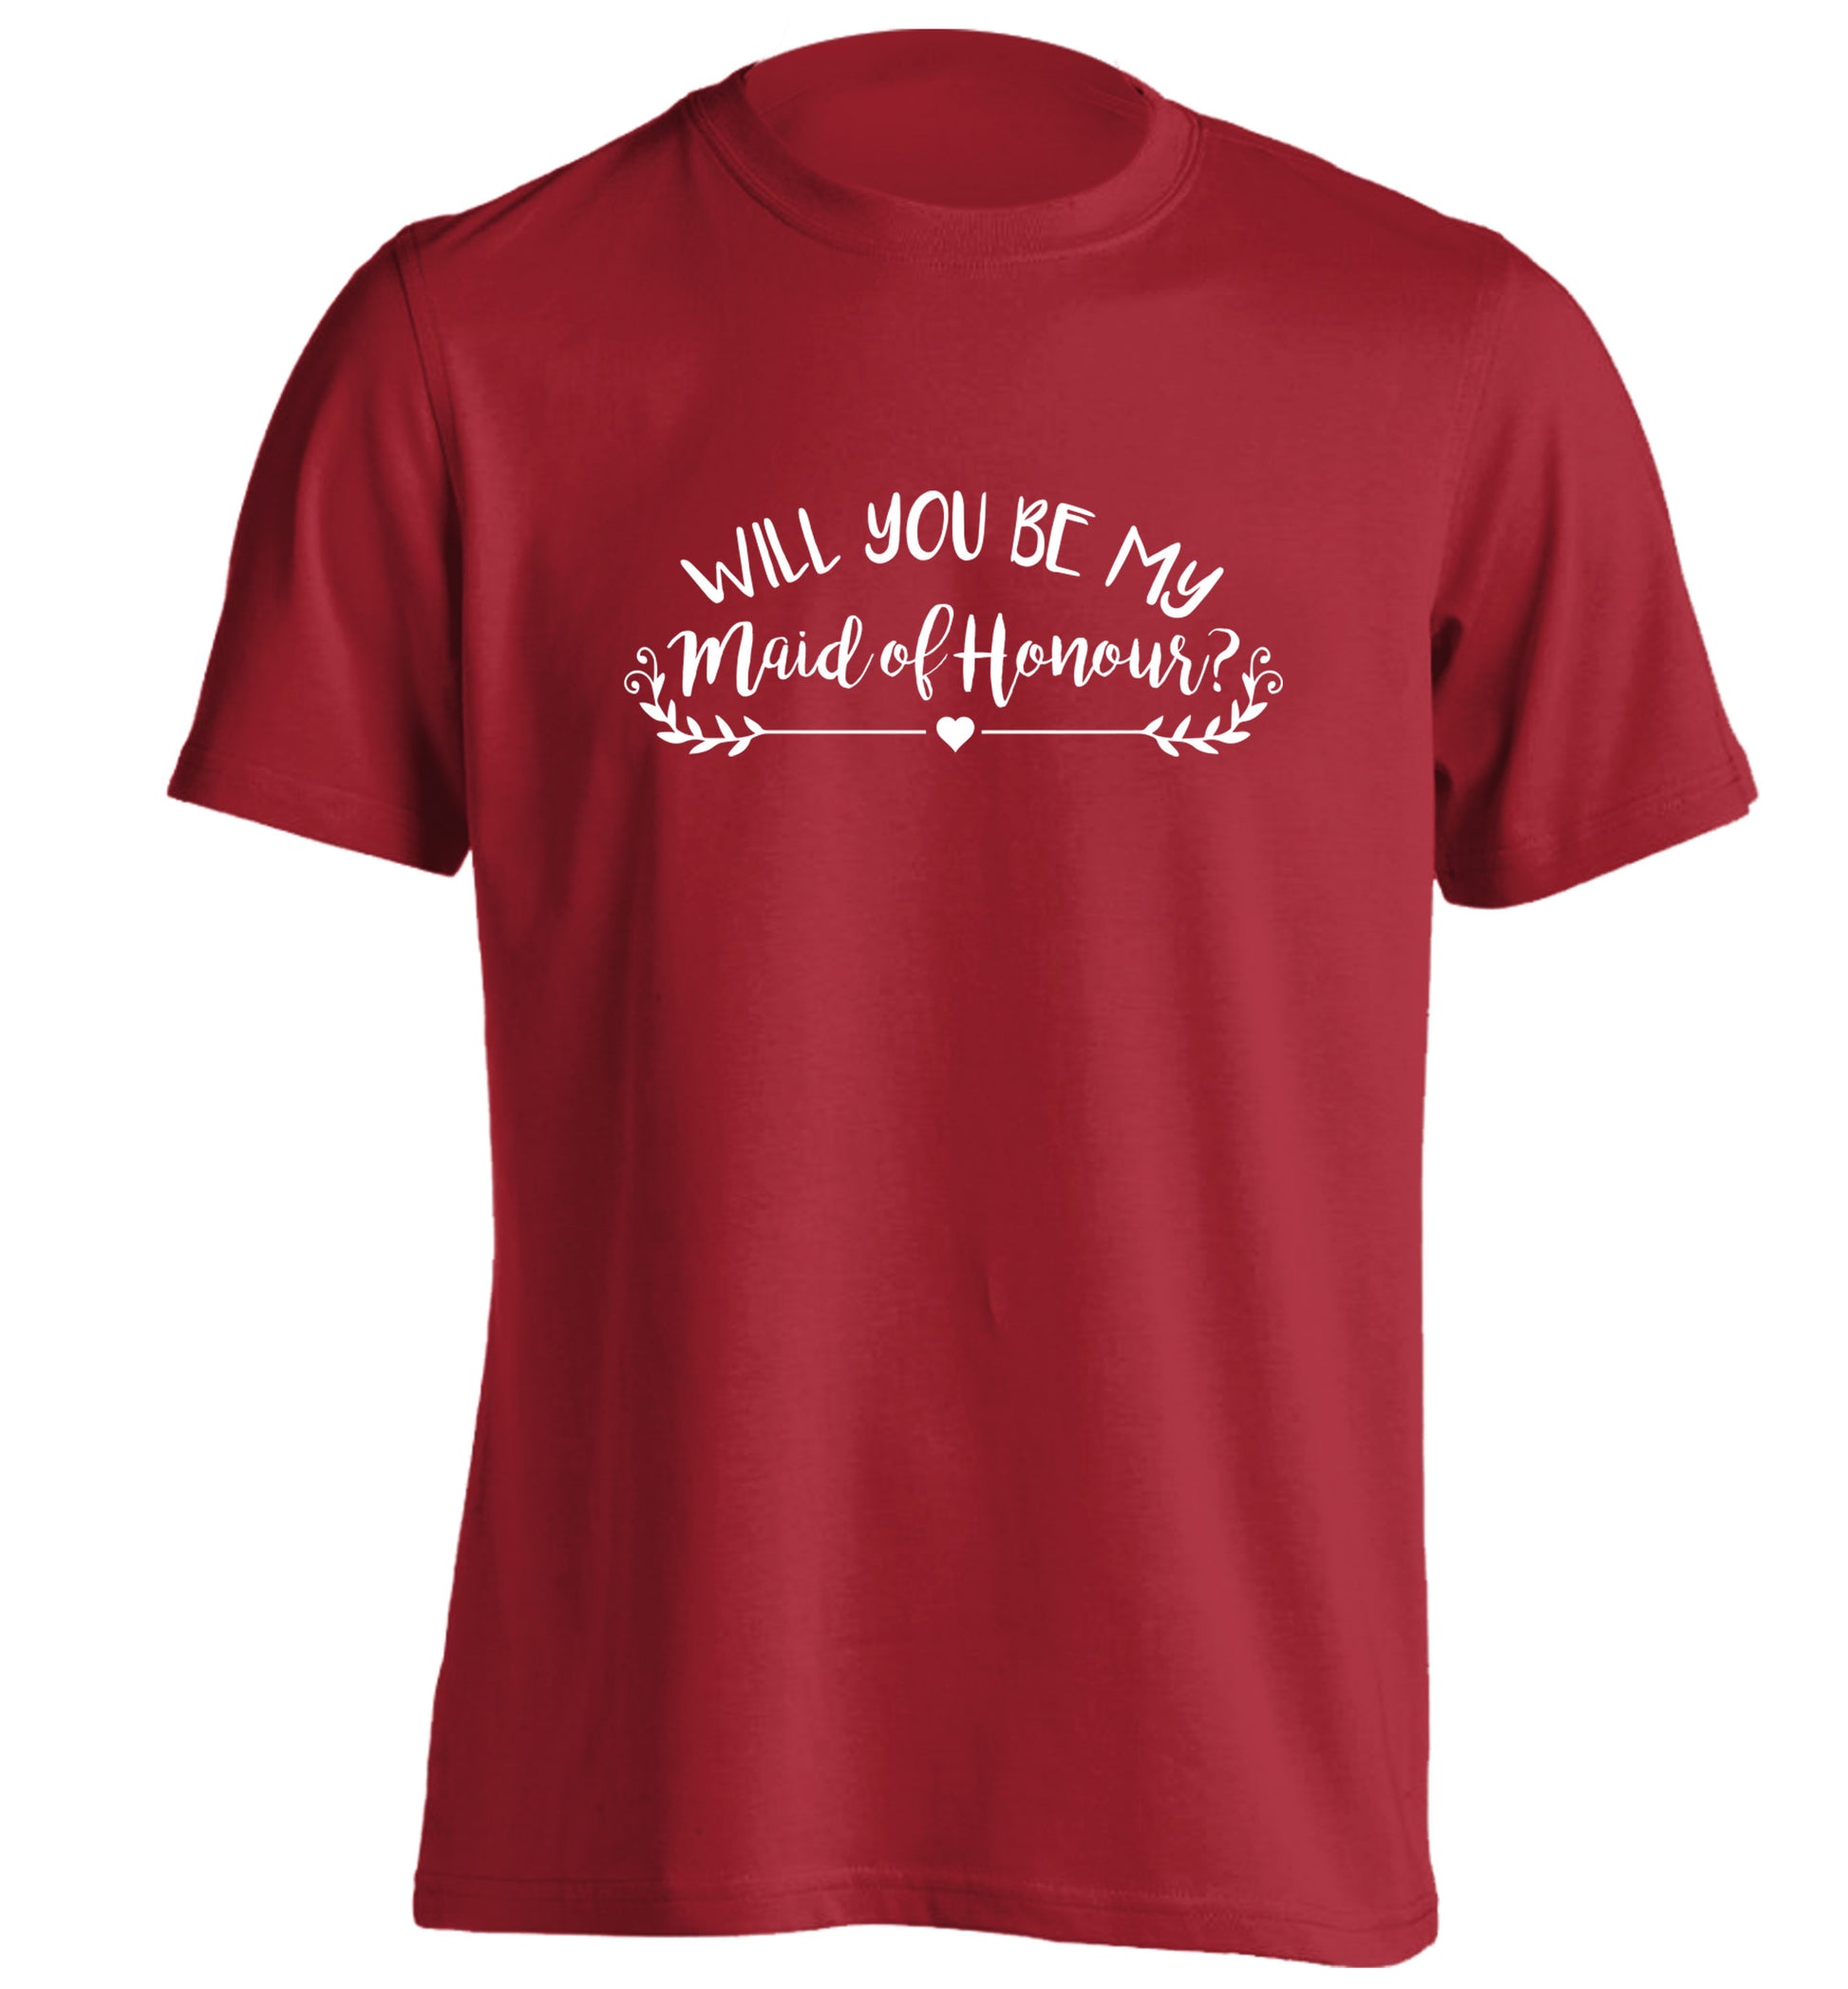 Will you be my maid of honour? adults unisex red Tshirt 2XL